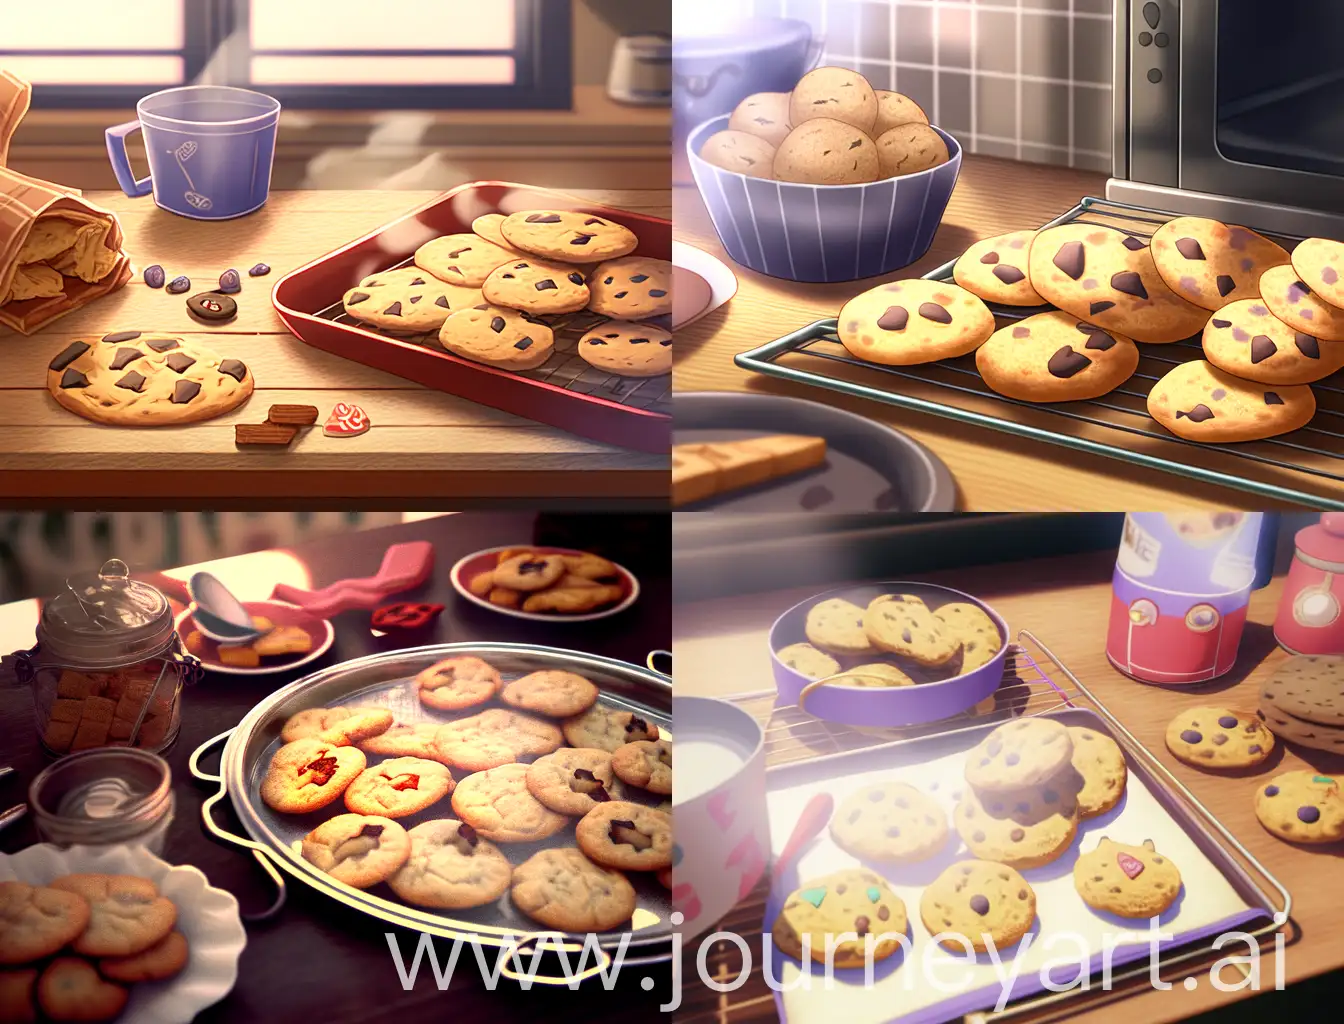 Baking-Freshly-Baked-Cookies-with-Kitchen-Accessories